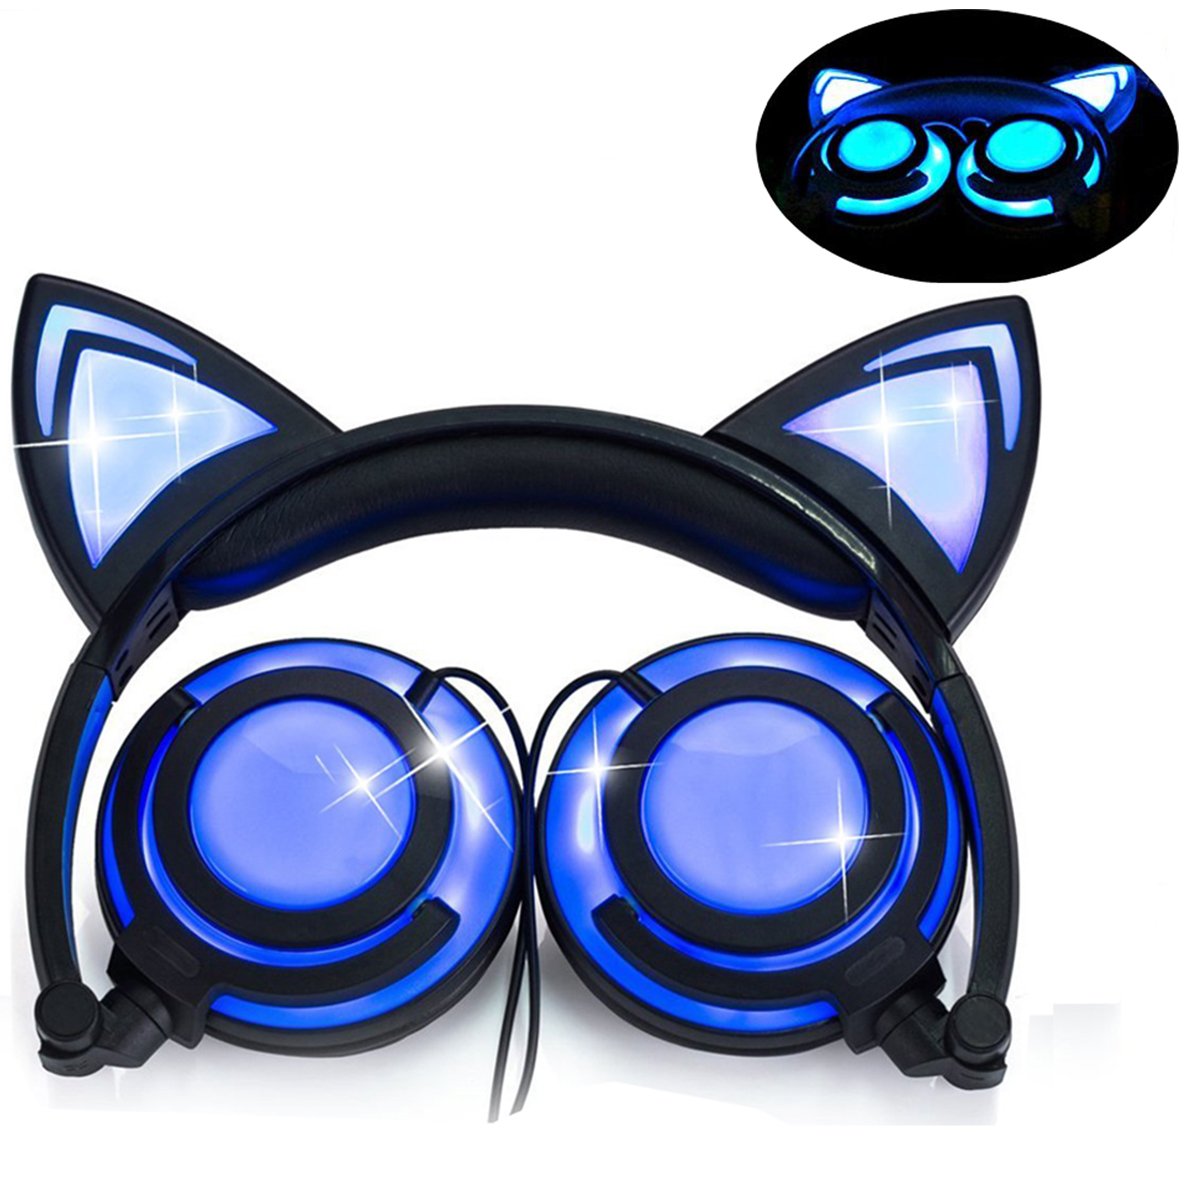 Cute Cat Ear Headset LED Light with USB Chargeable Foldable Earphones for Ipad,Tablet,Computer,Mobile Phone  blue